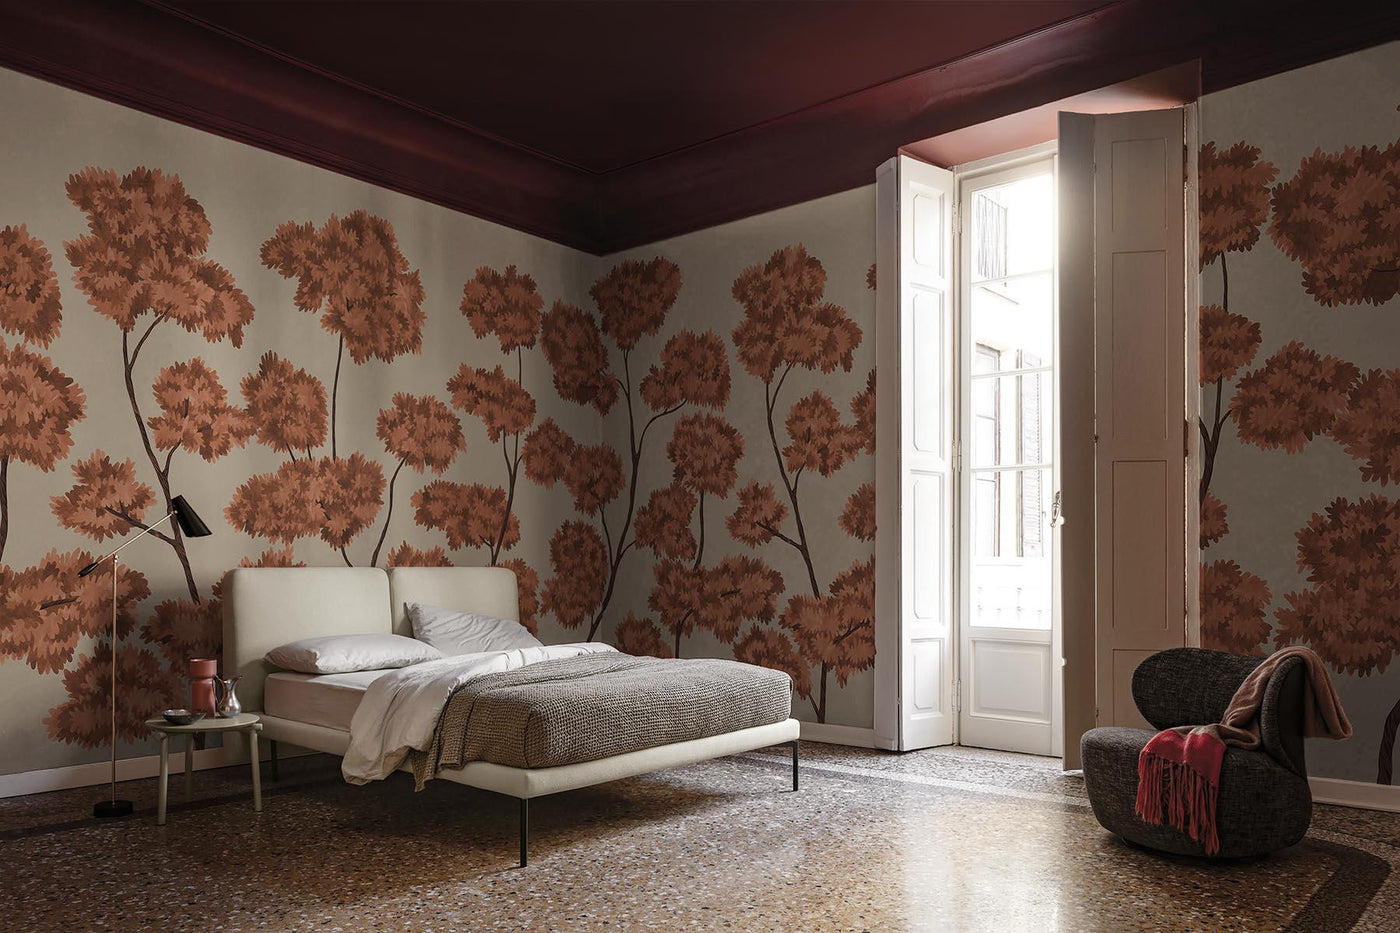 red and wall mural on the back wall of this bedroom. Beige and white bed with linnen bedding. Wooden floor. 